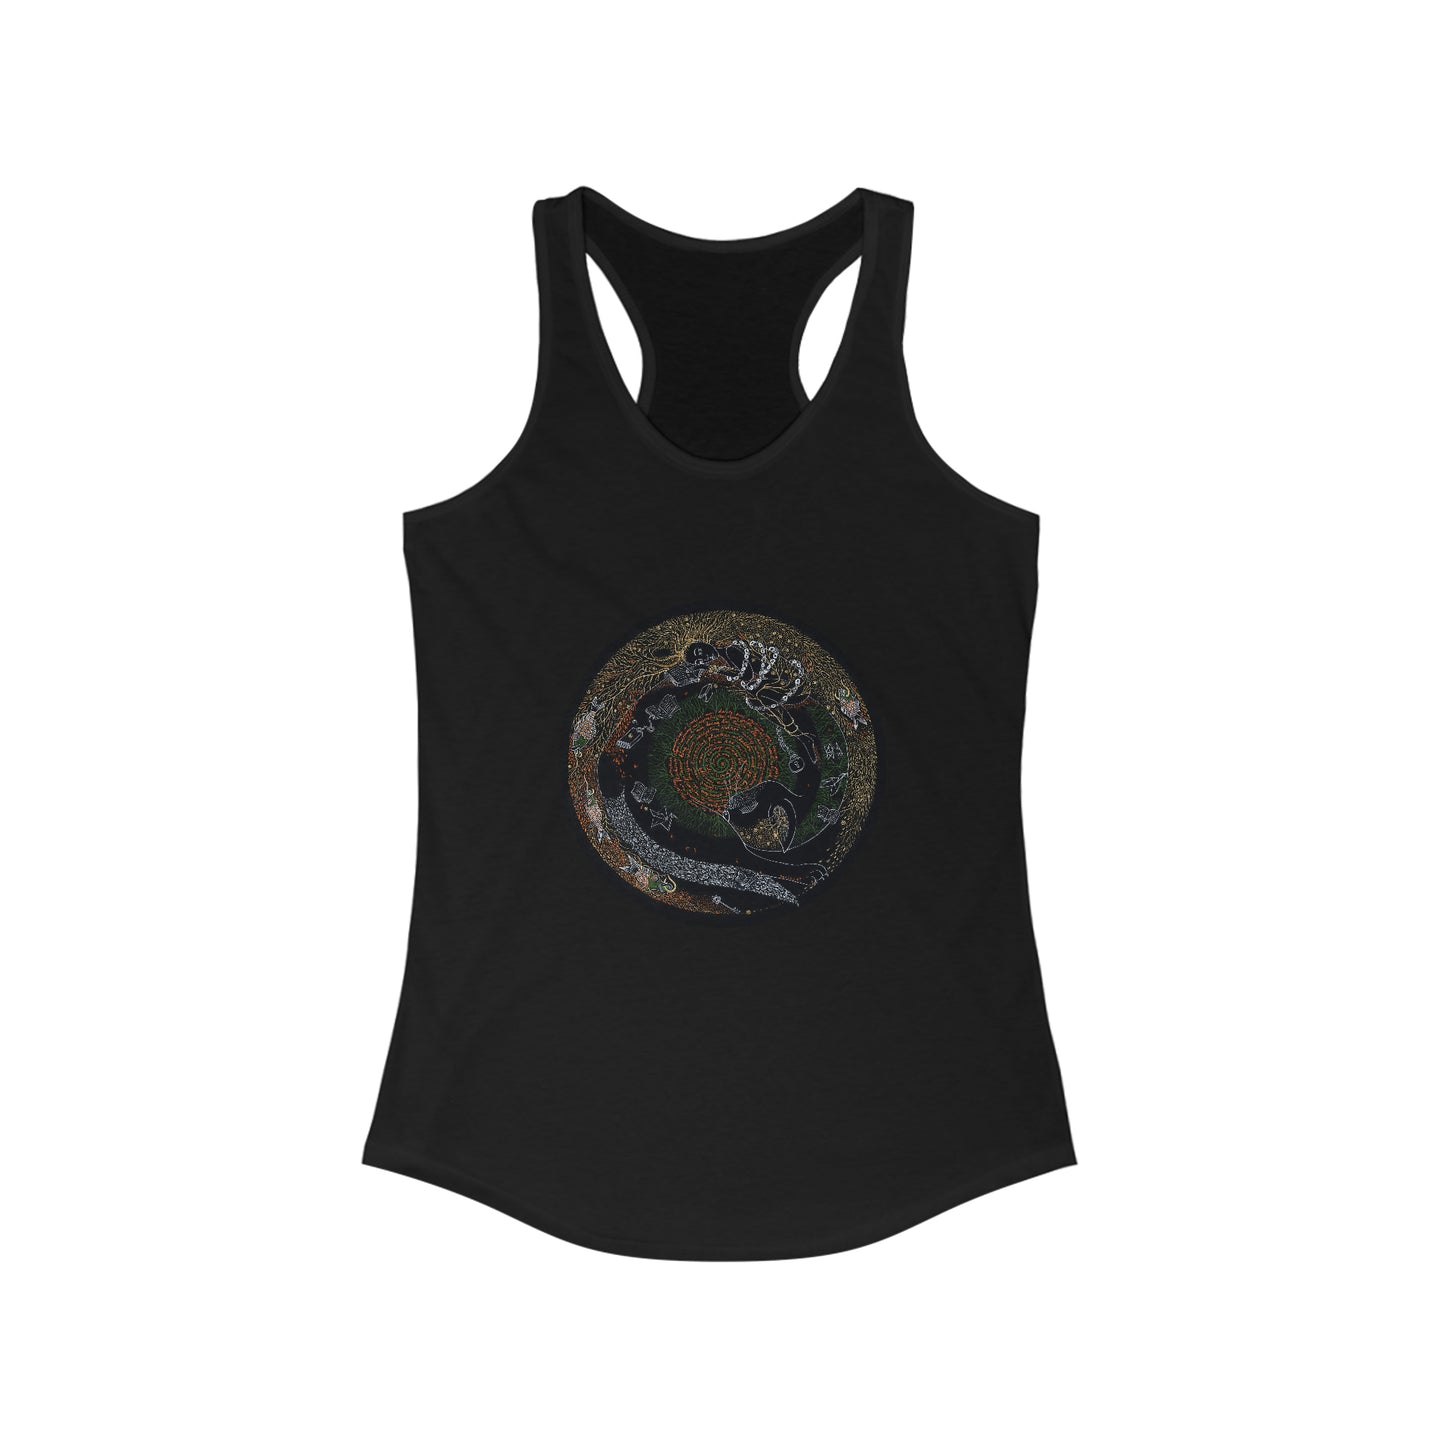 Chinese Zodiac Sign Tank Top (Cat)